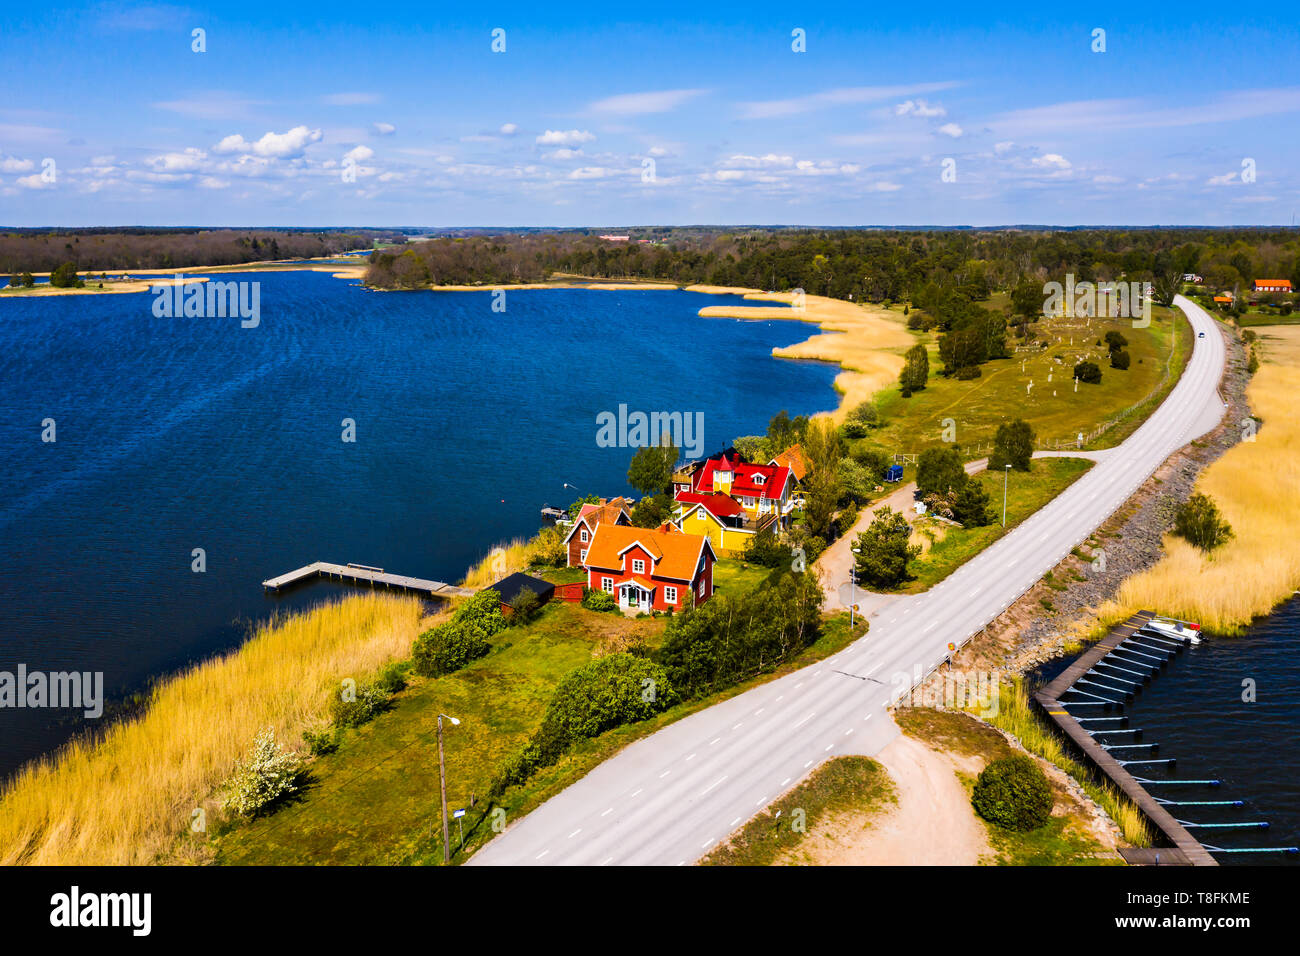 Small seaside village in beautiful landscape on a sunny spring day. Situated on a narrow stretch of land beside a small road and surrounded by water.  Stock Photo